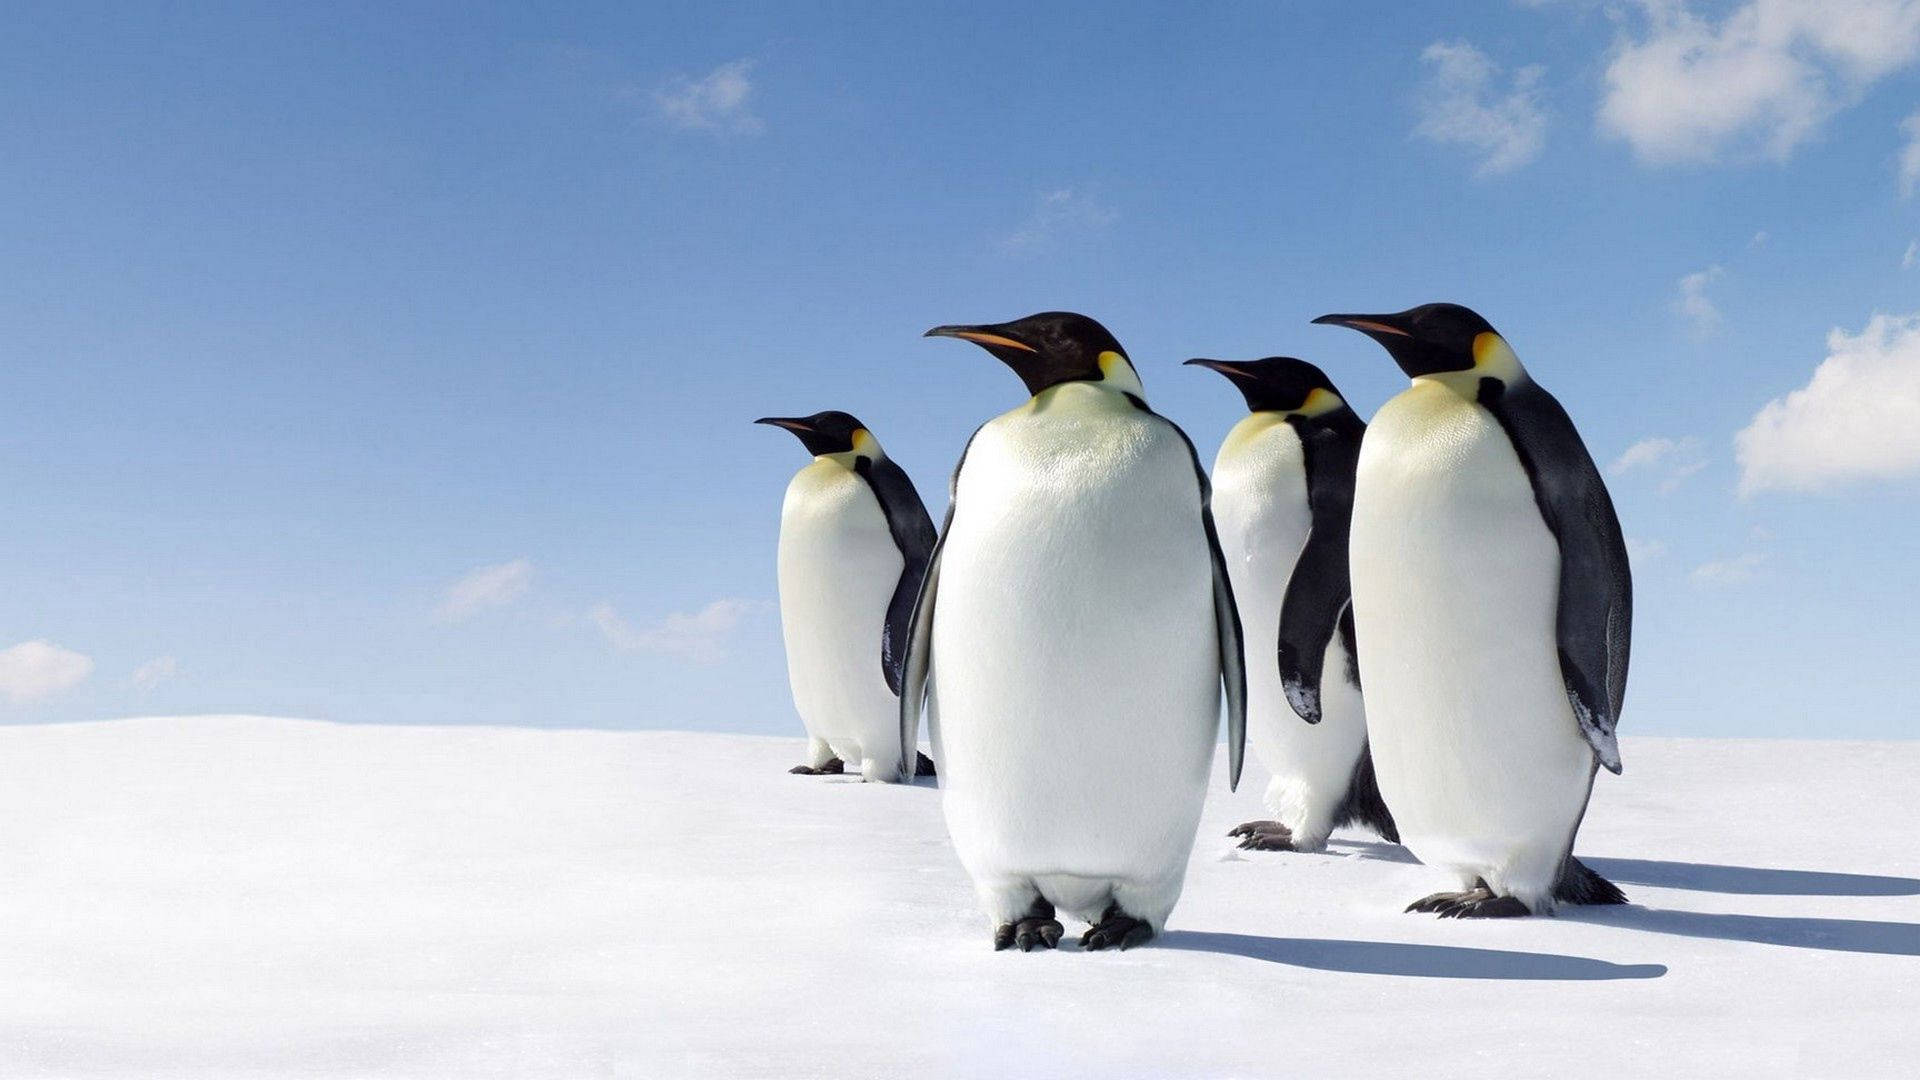 A Group Of Penguins Standing On A Snowy Field Background